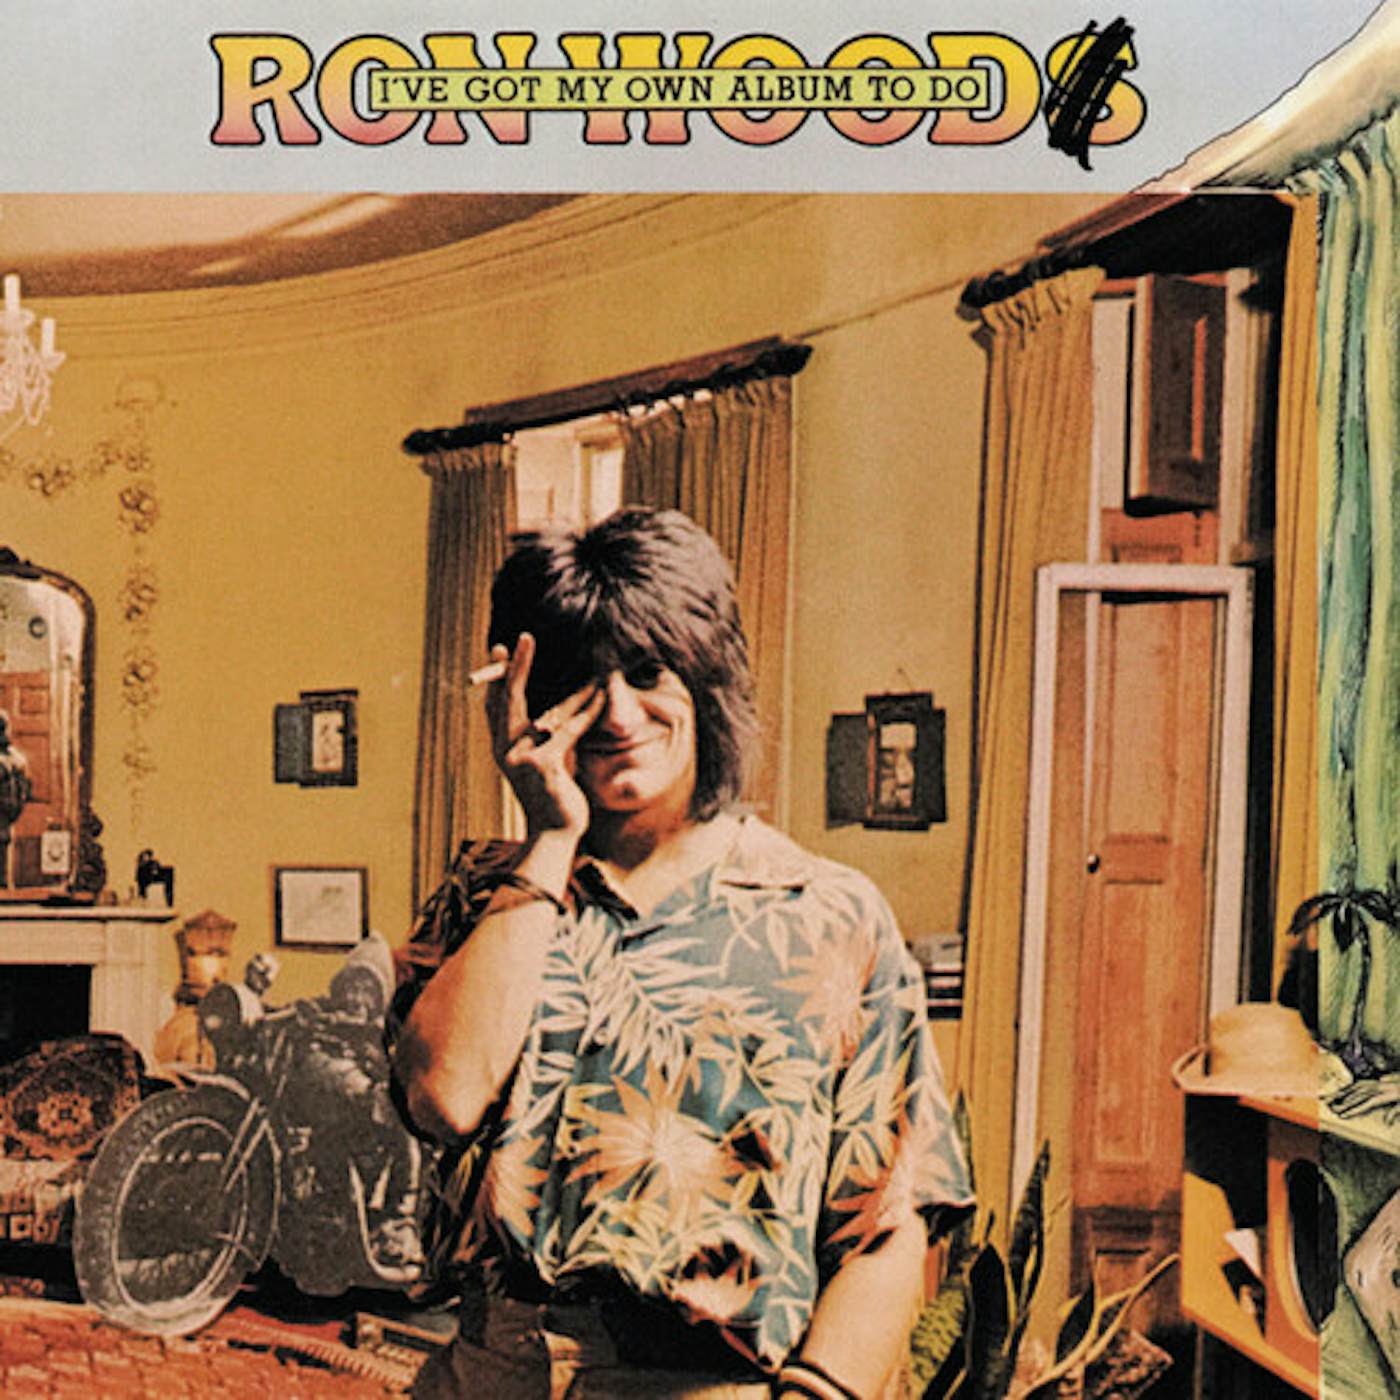 Ronnie Wood I'VE GOT MY OWN ALBUM TO DO CD